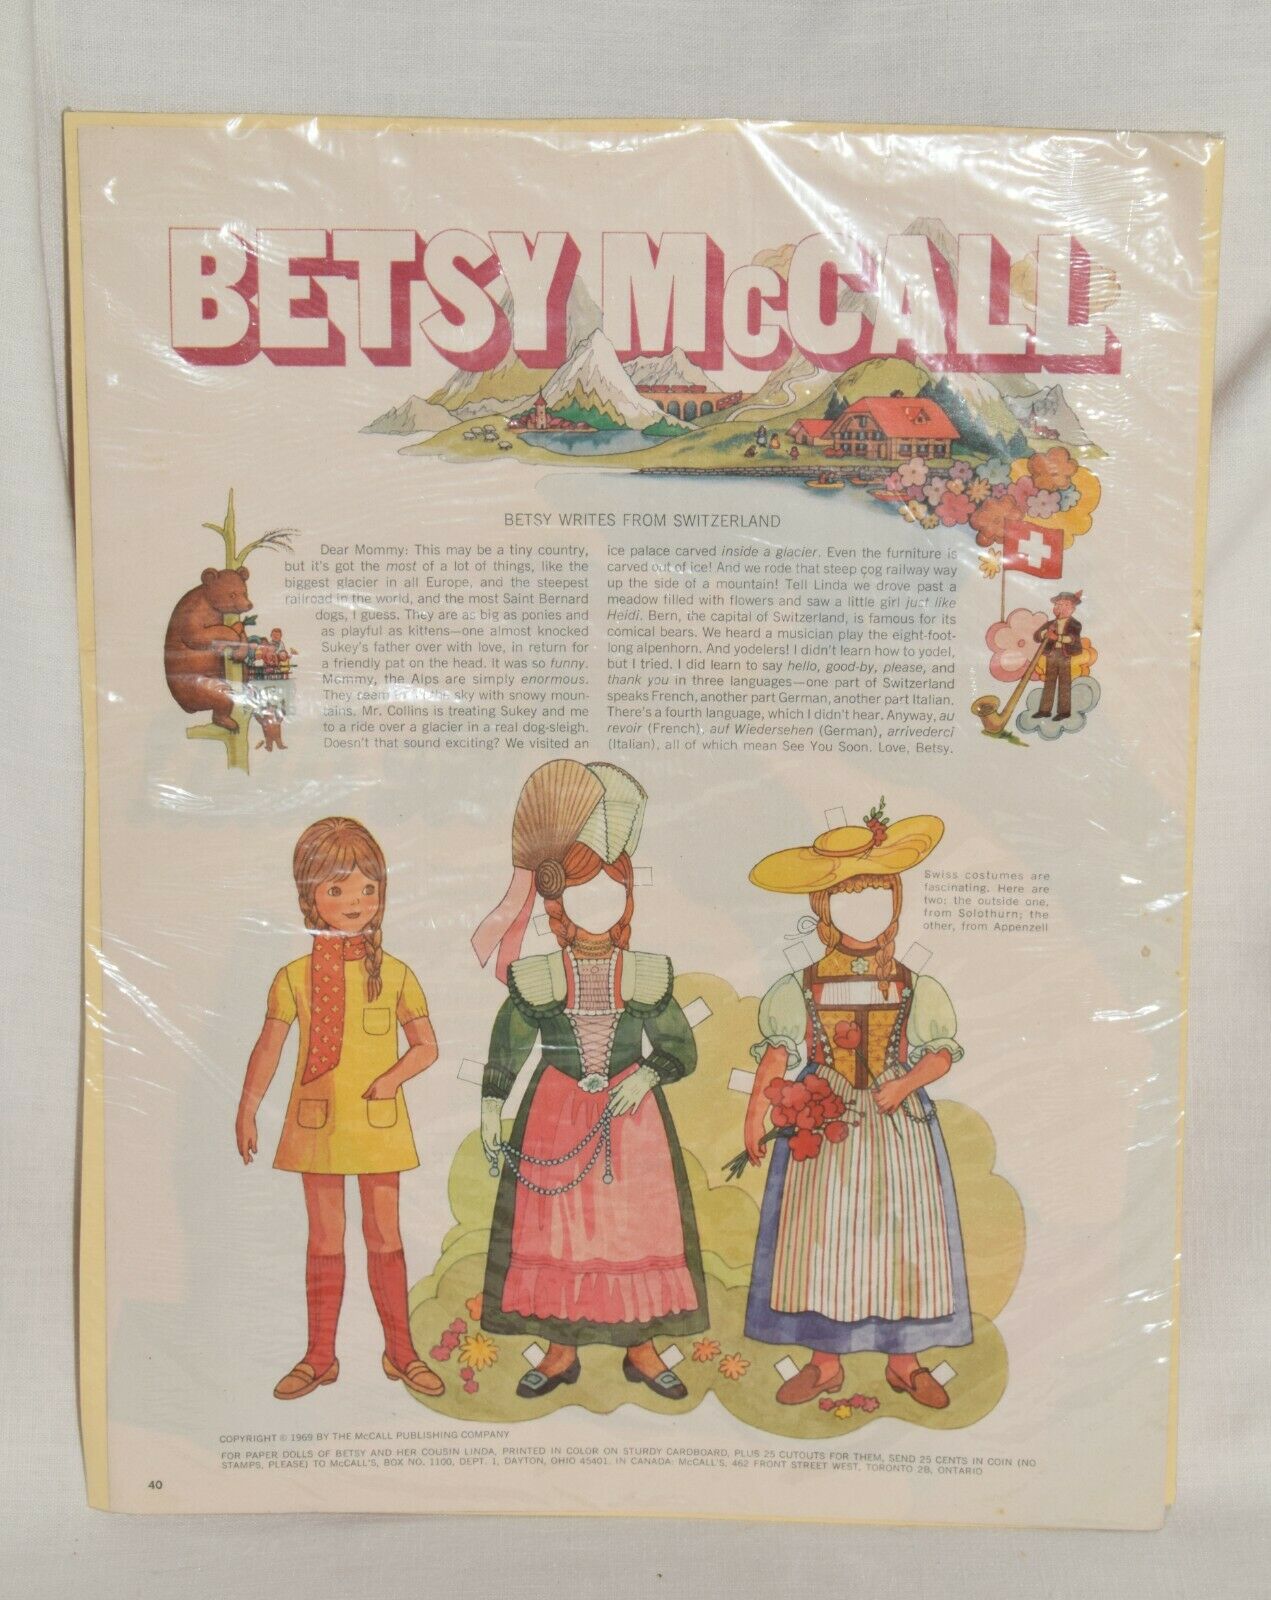 Vintage Betsy McCall Mag. Paper Doll, Betsy Writes from Switzerland, Sept. 1969